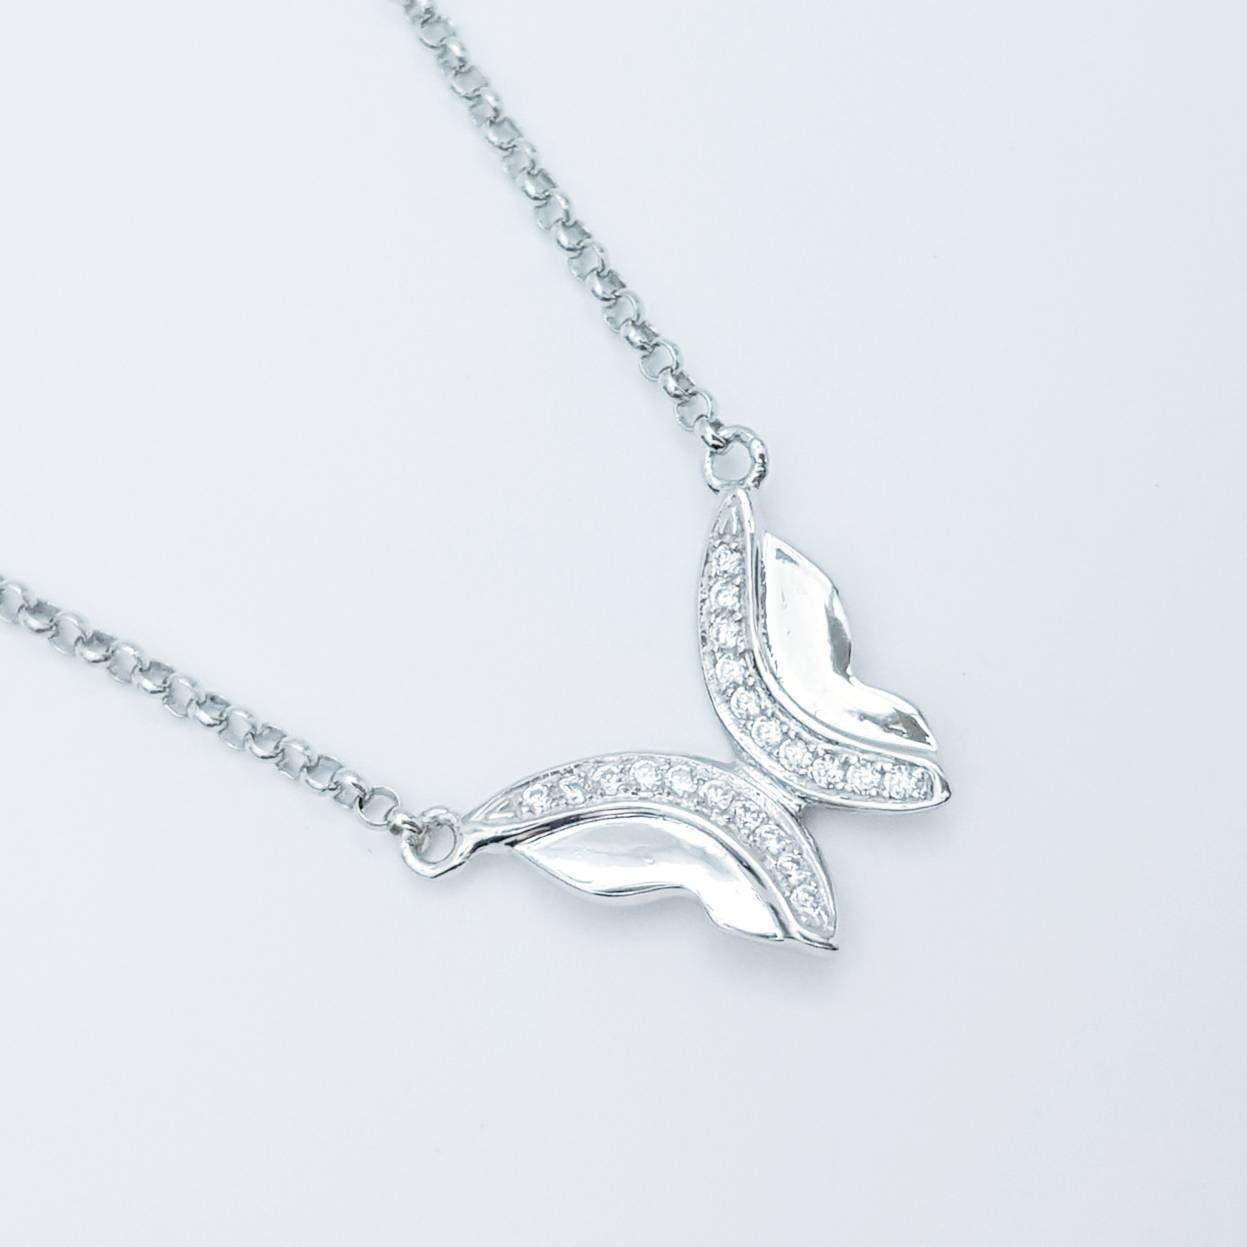 Butterfly necklace, sterling silver butterfly pendant